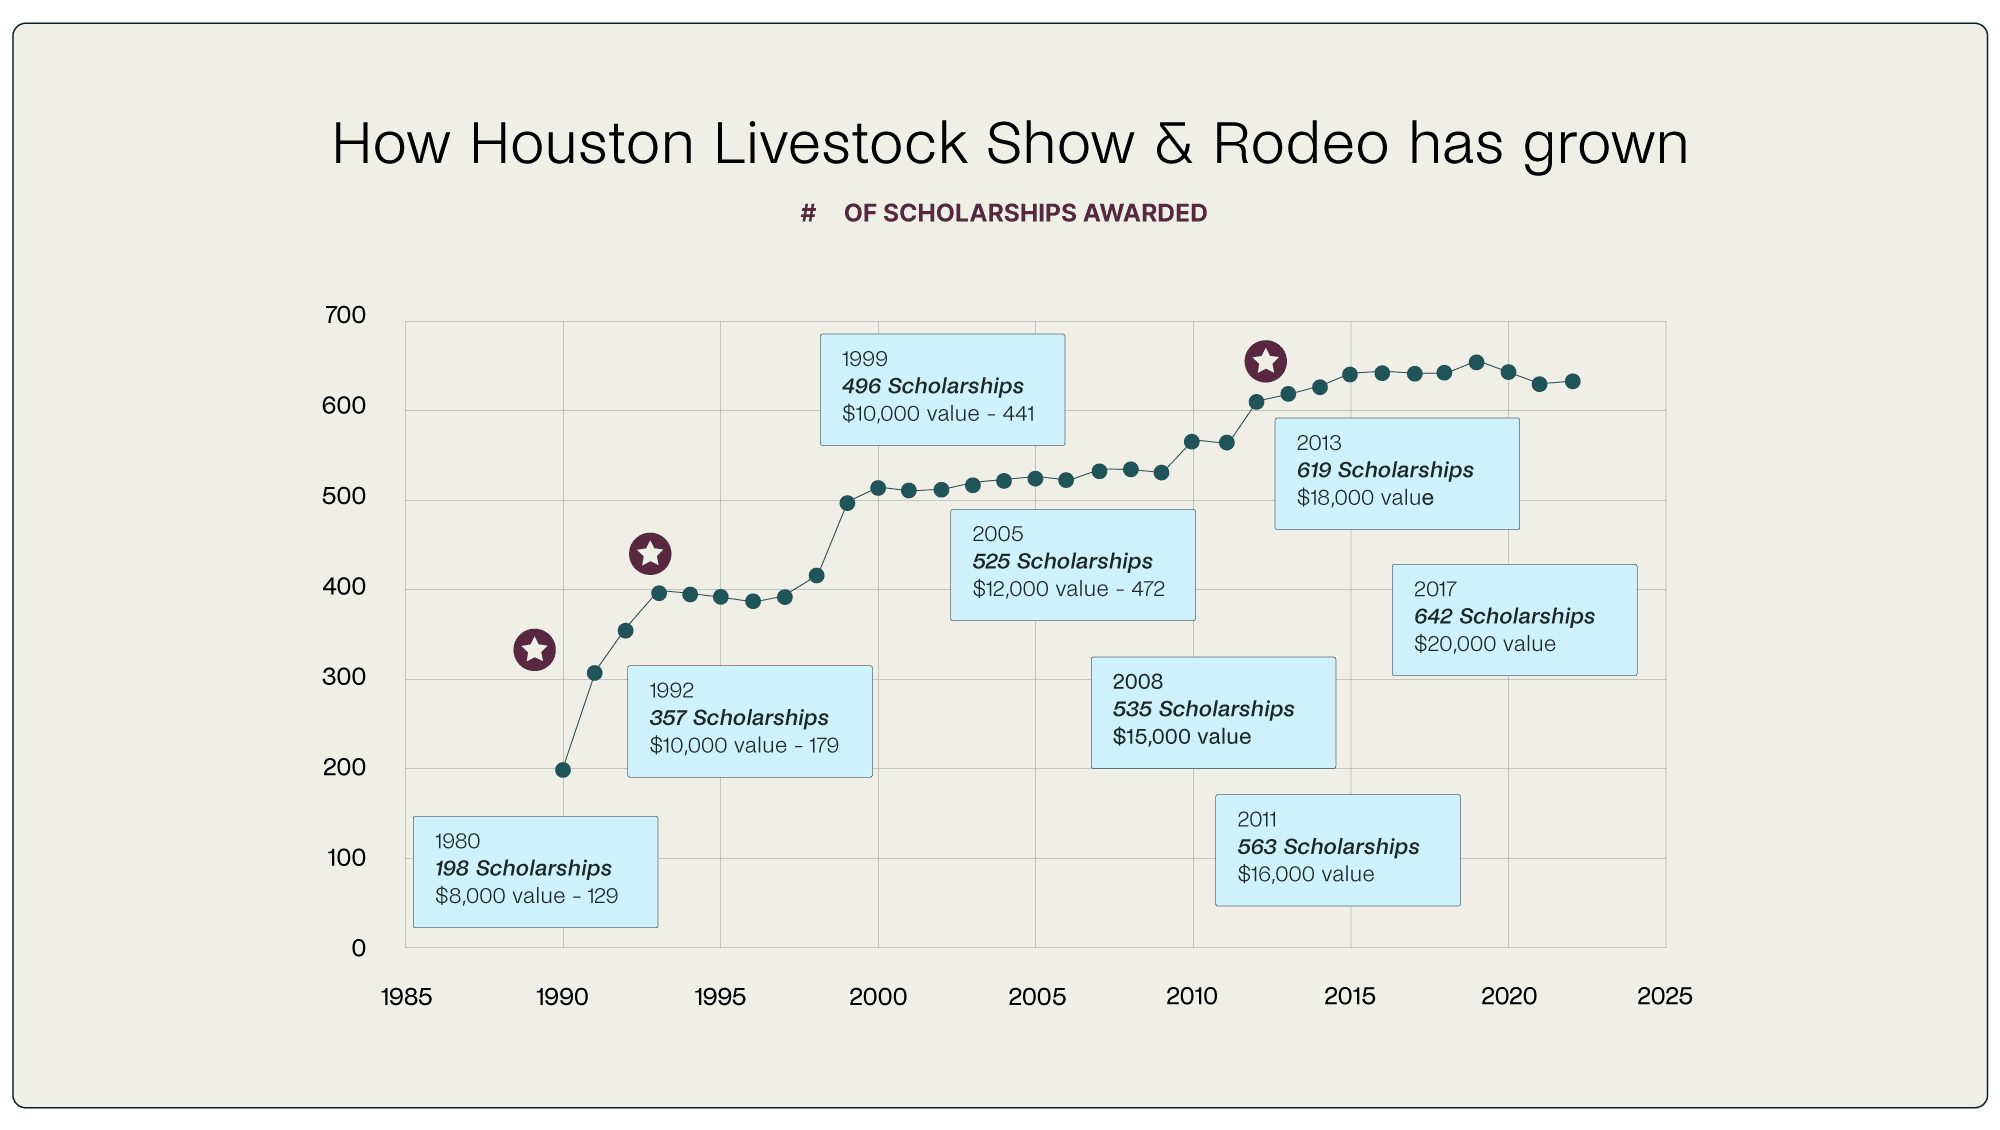 How Houston Livestock Show & Rodeo has grown since 1980. In 1980 They have 198 Scholarships. After partnering with Kaleidoscope, by 2017 they had 642 Scholarships. 